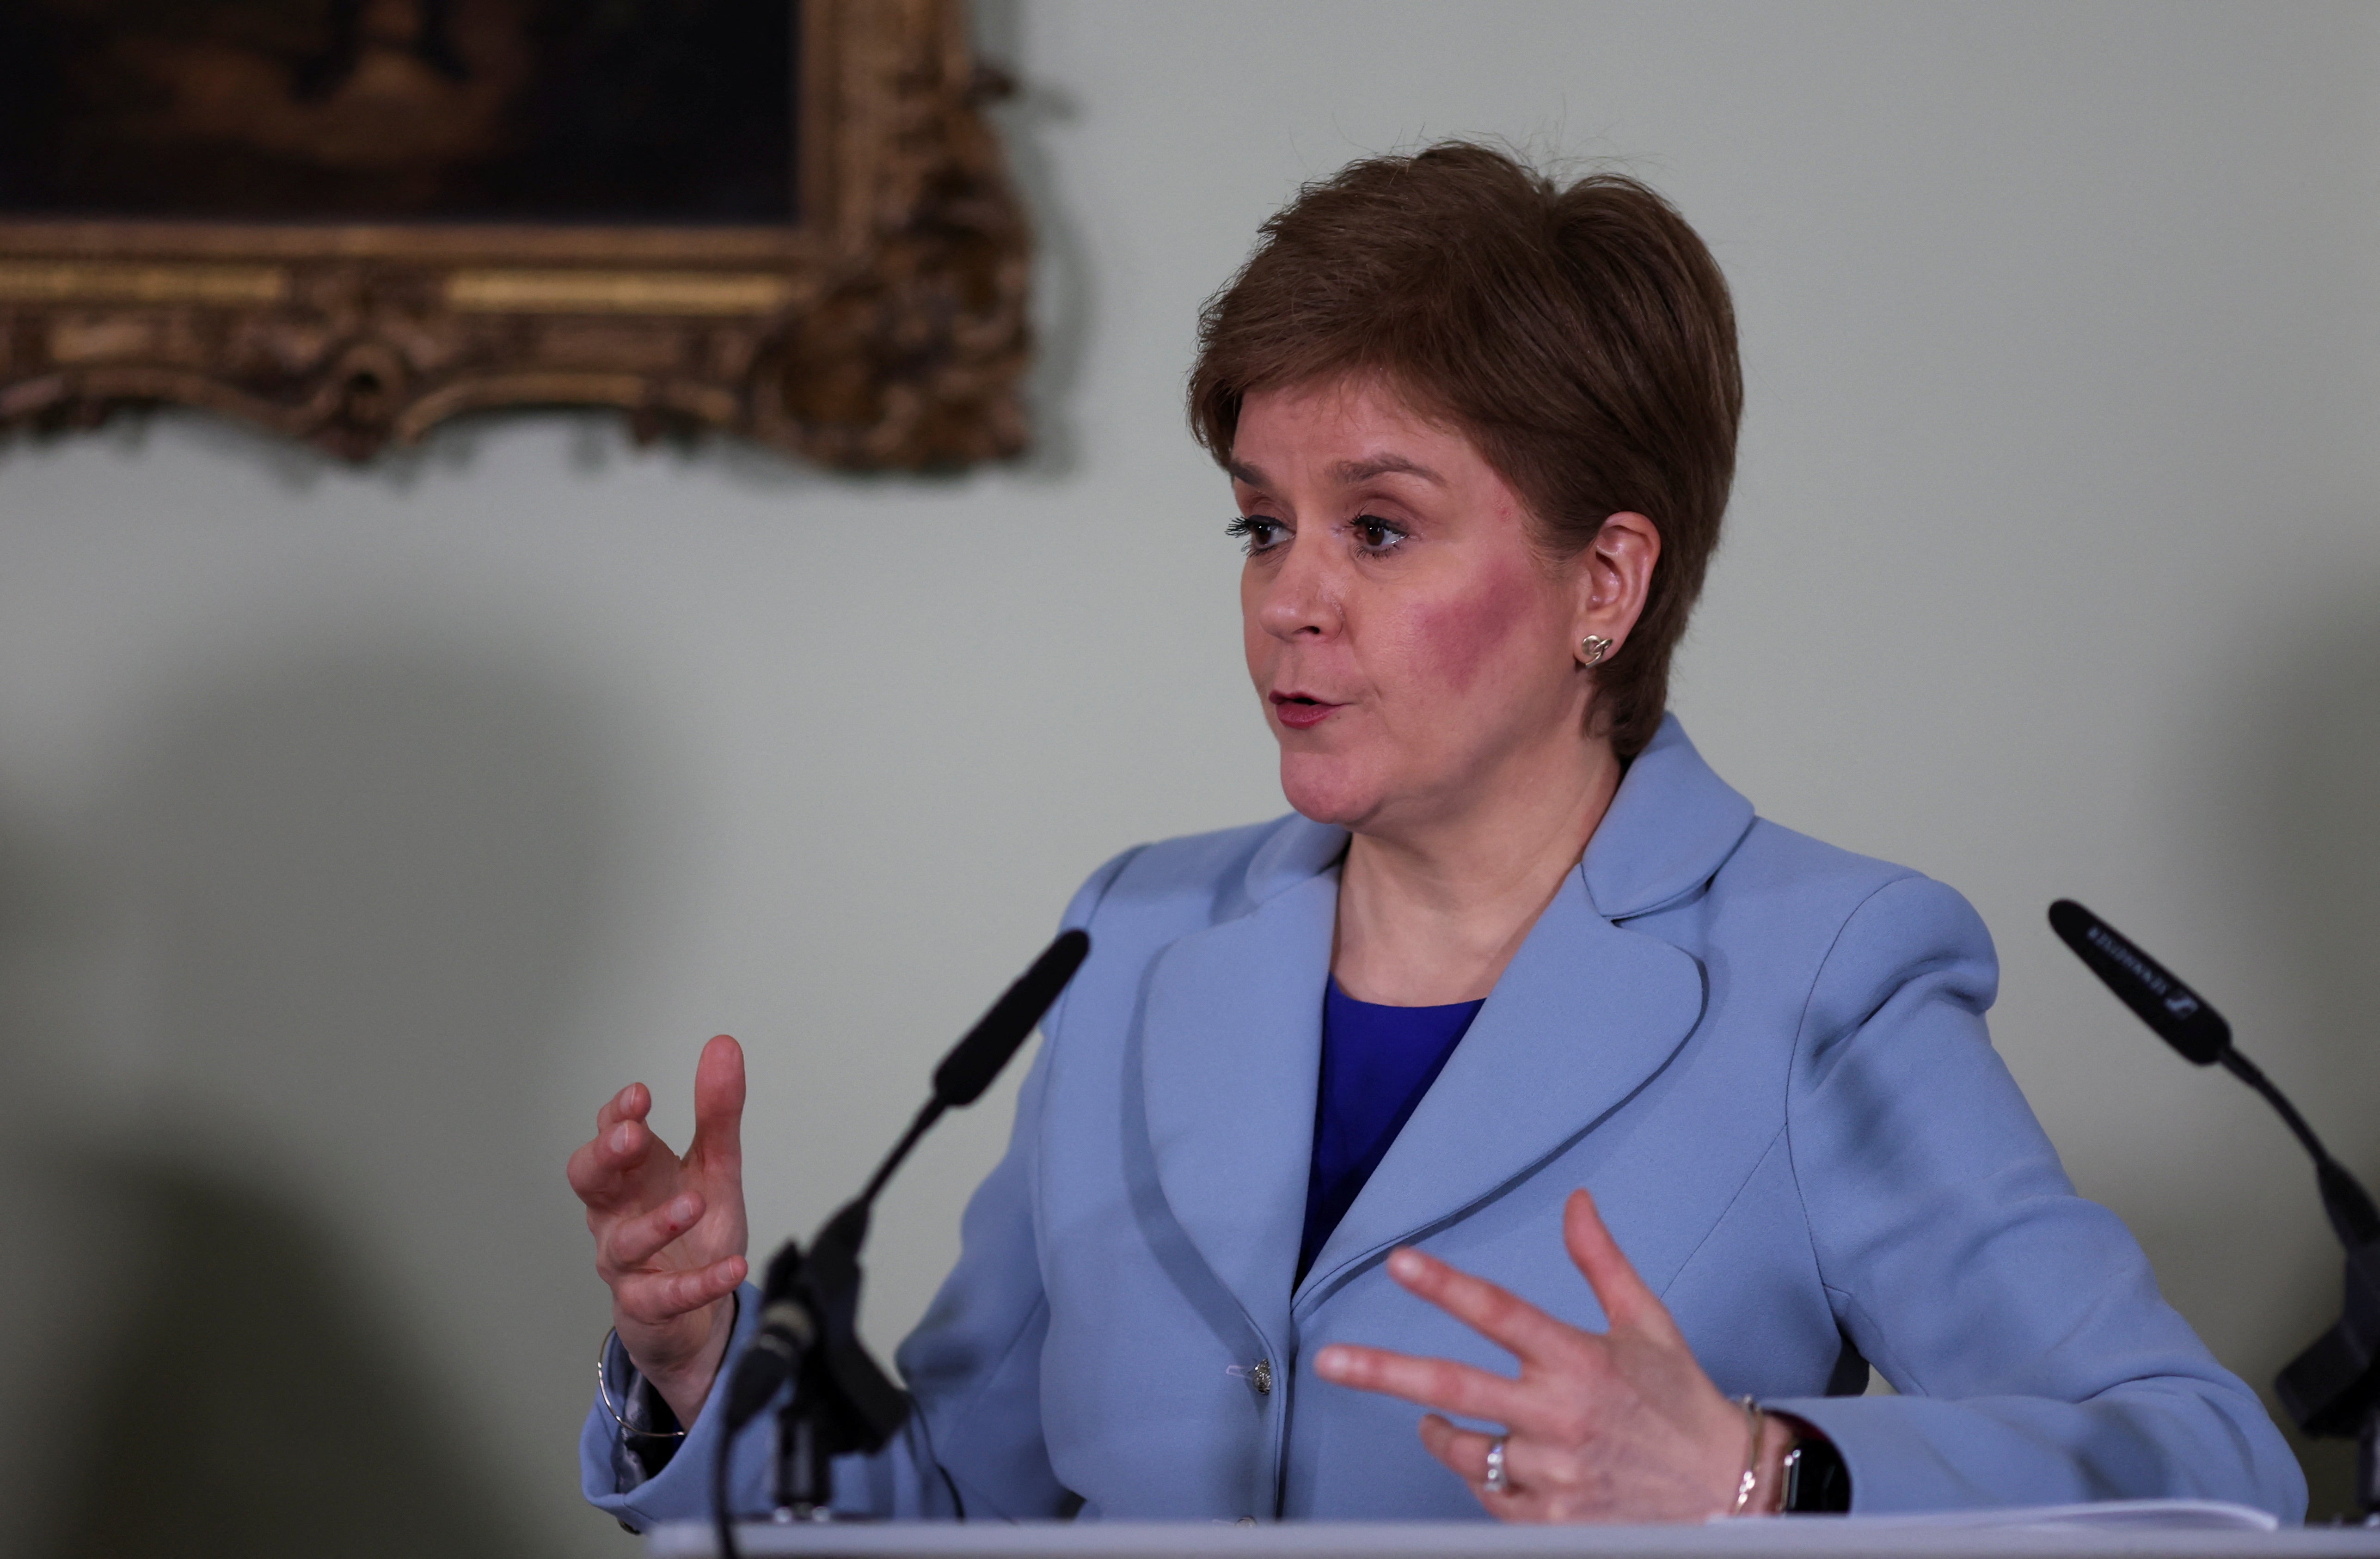 There is a ‘strong and compelling’ case for Scotland to leave the UK, Nicola Sturgeon insisted. (Russell Cheyne/PA)